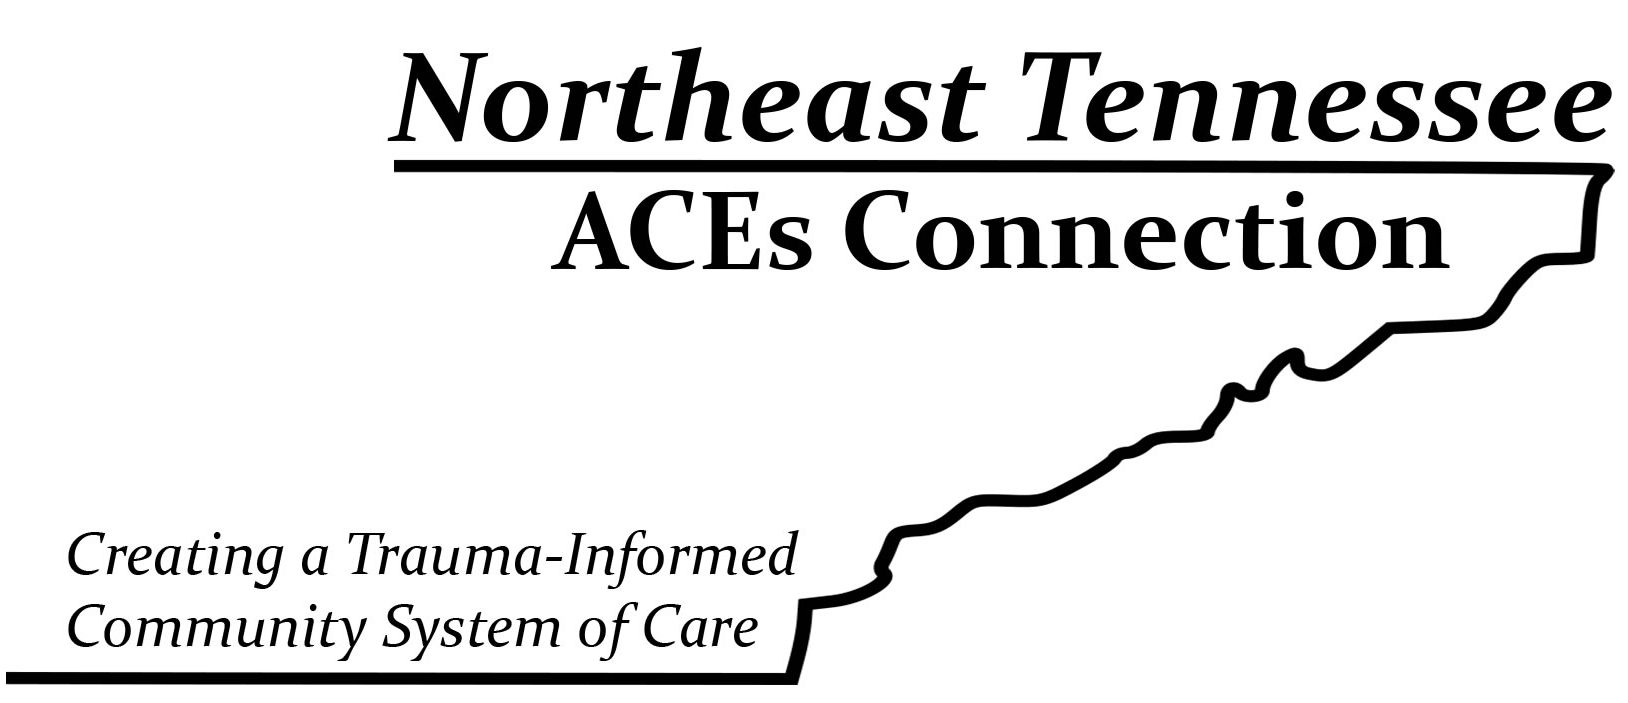 Northeast Tennessee ACEs Connection